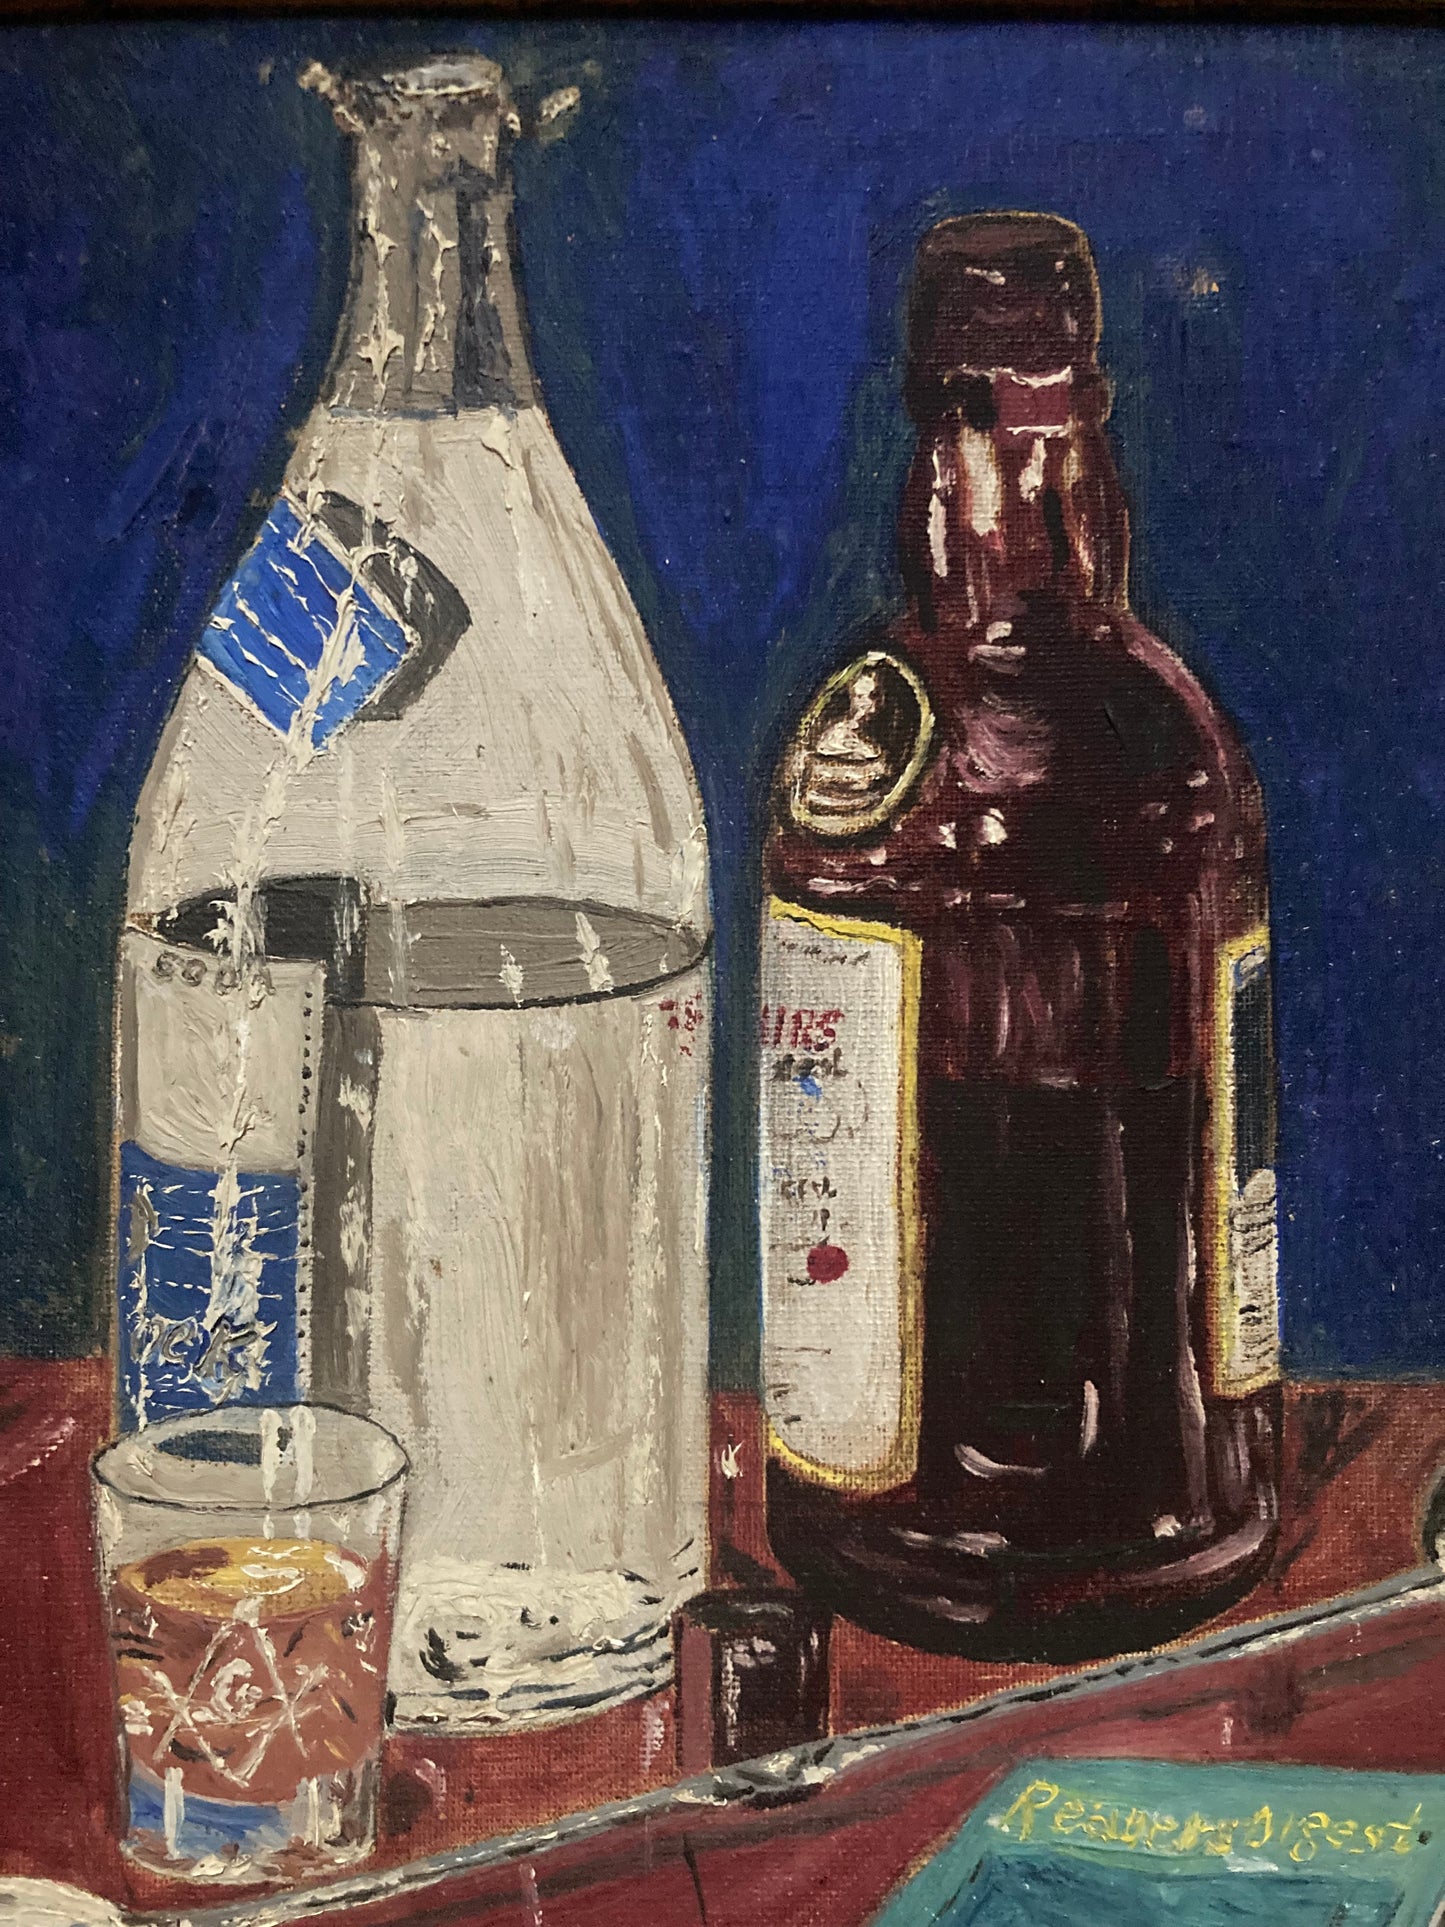 Still Life Painting Naive 1950s Smoking Cigarette with Liquor Bottles and Dogeared Readers Digest and Masonic Symbols